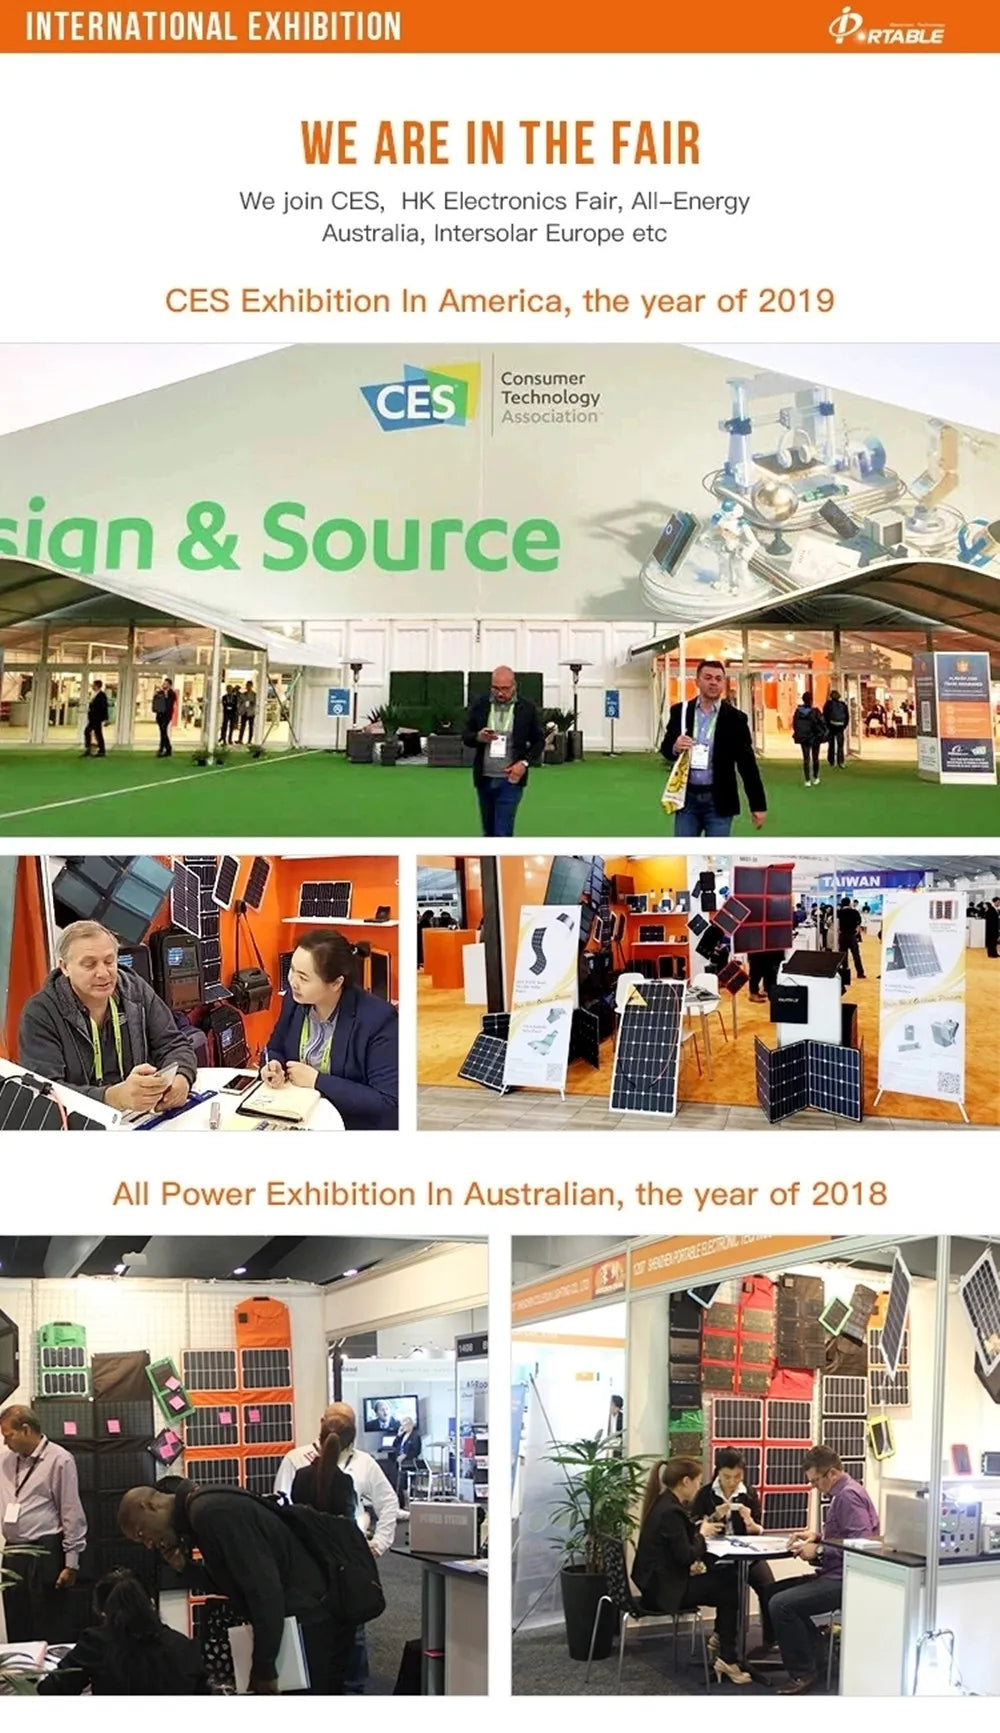 JINGYANG long lasting Semi Flexible solar panel, JINGYANG showcases high-quality products at international exhibitions like CES, All-Energy Australia, and Intersolar Europe.